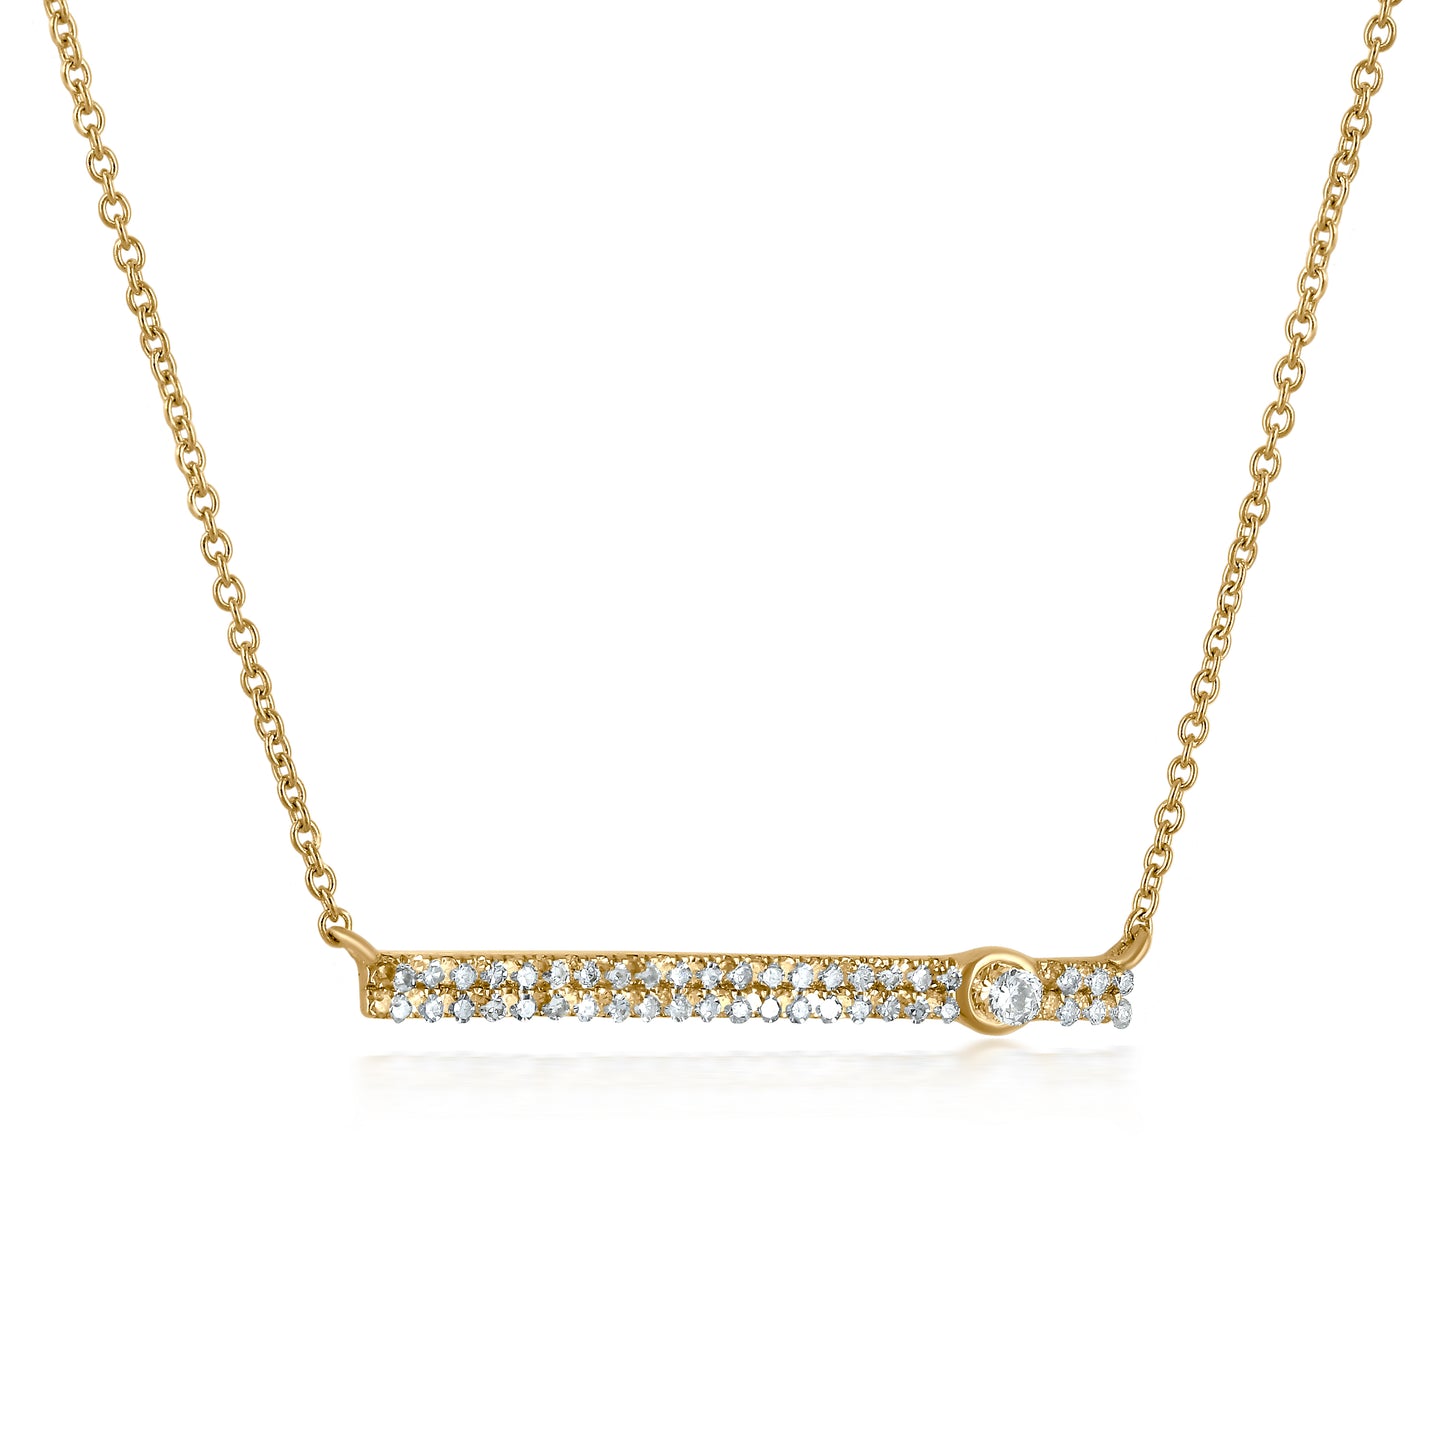 The Lafayette Necklace